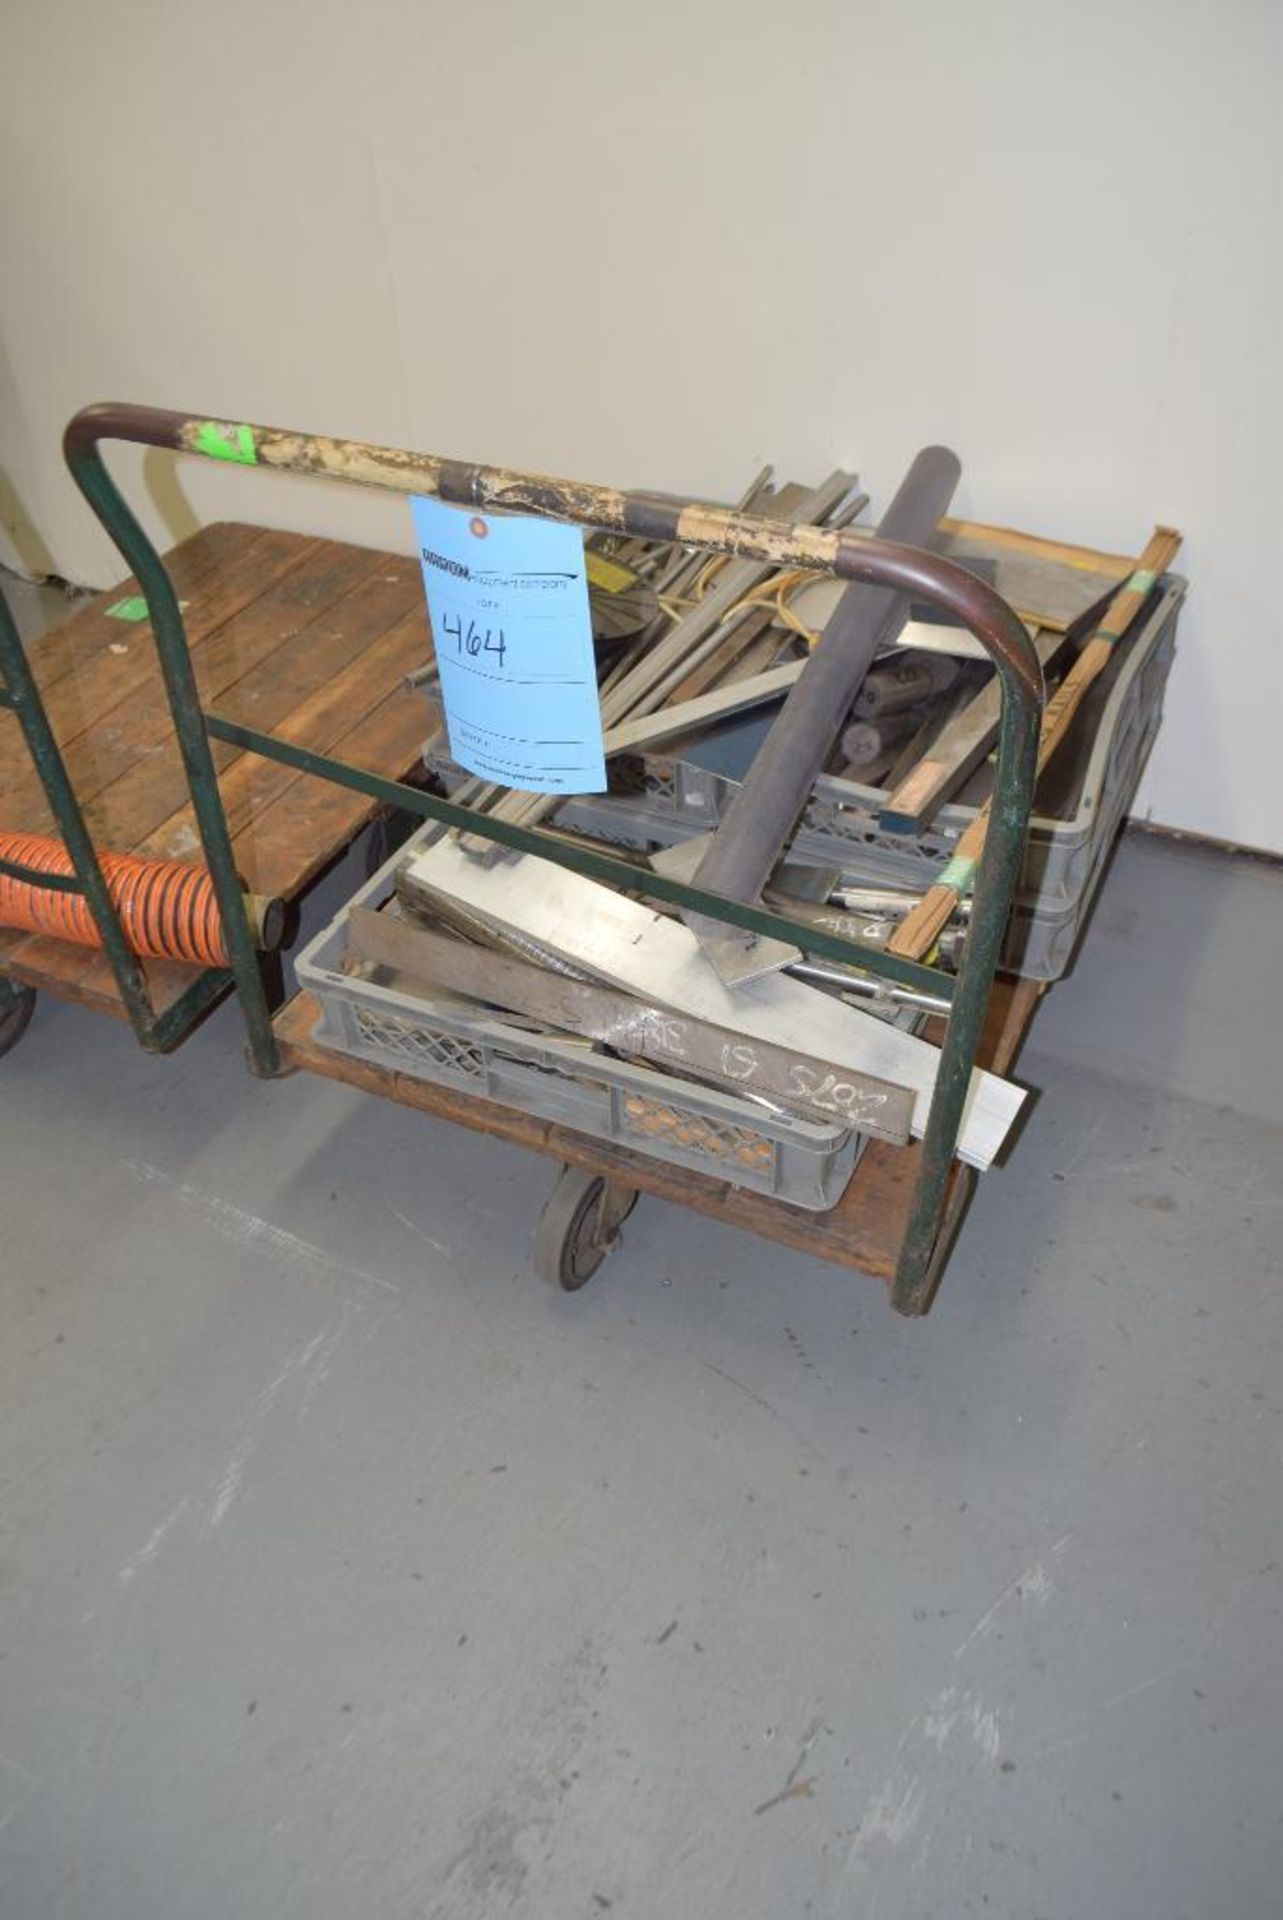 (1) Wood flatbed cart. WITH CONTENTS.